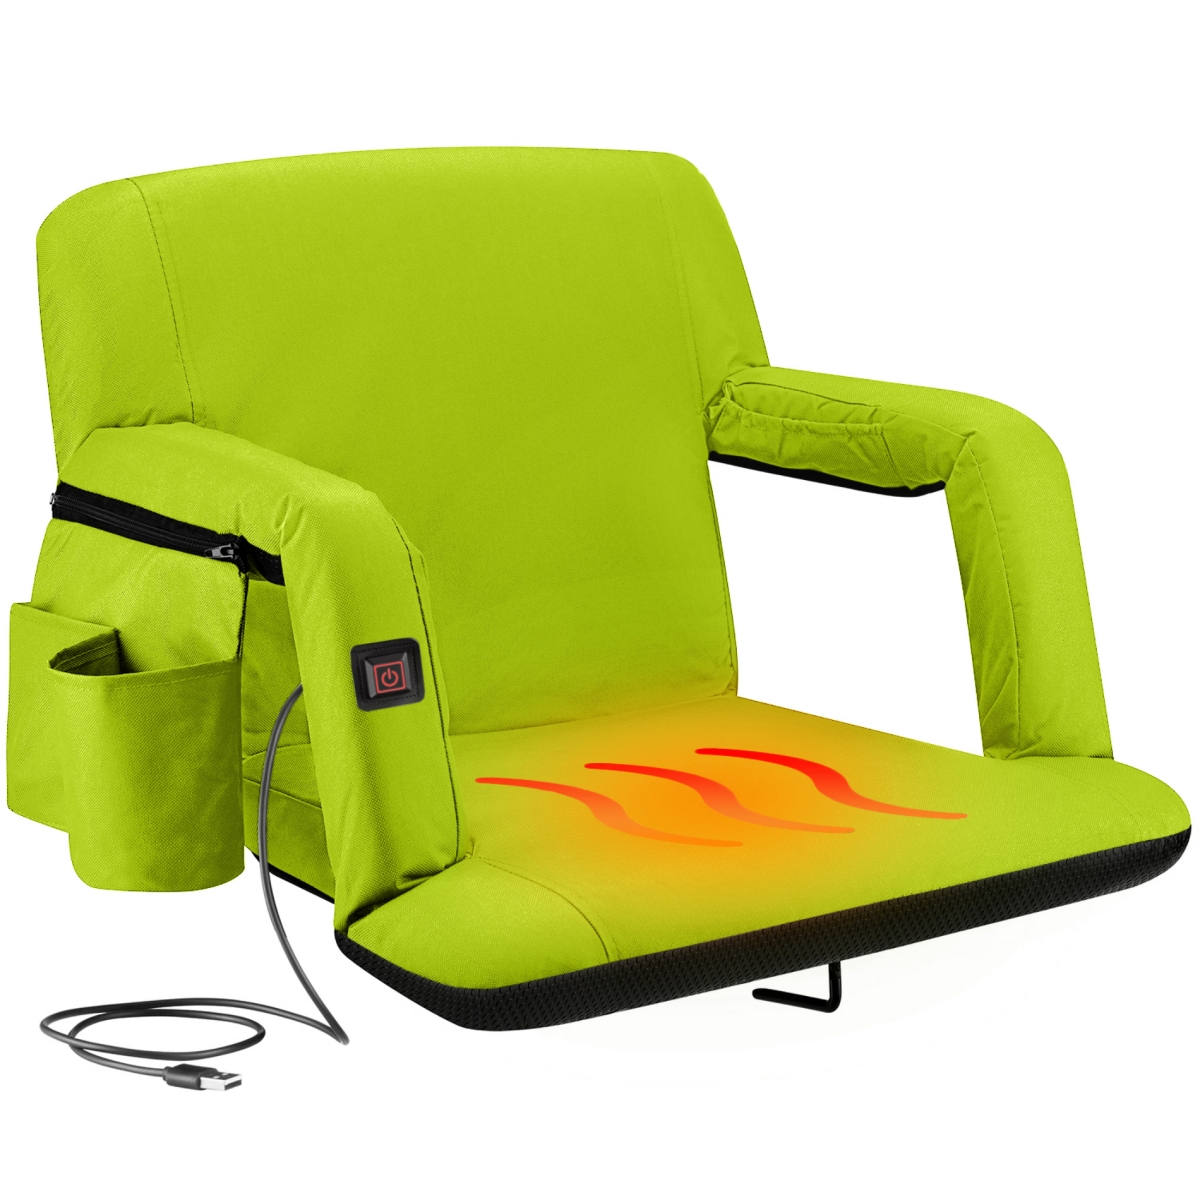 Heated Reclining Stadium Seat - Waterproof Foldable Camping Chair with Extra Thick Padding and Wide Back Support - Orange